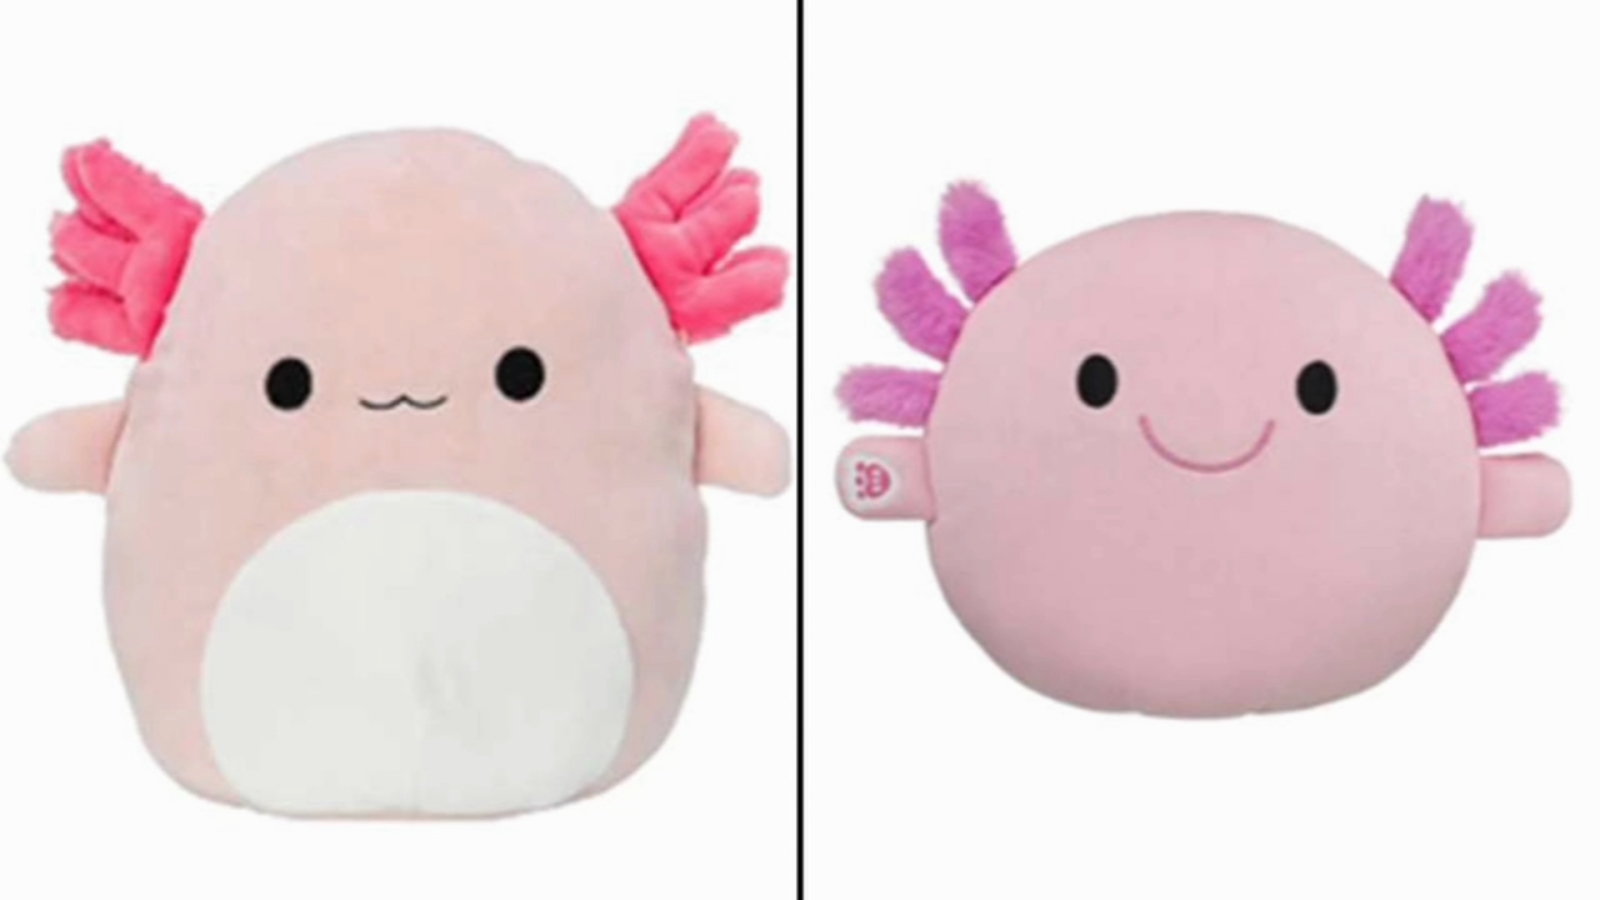 Squishmallows and Build-A-Bear head into legal battle over 